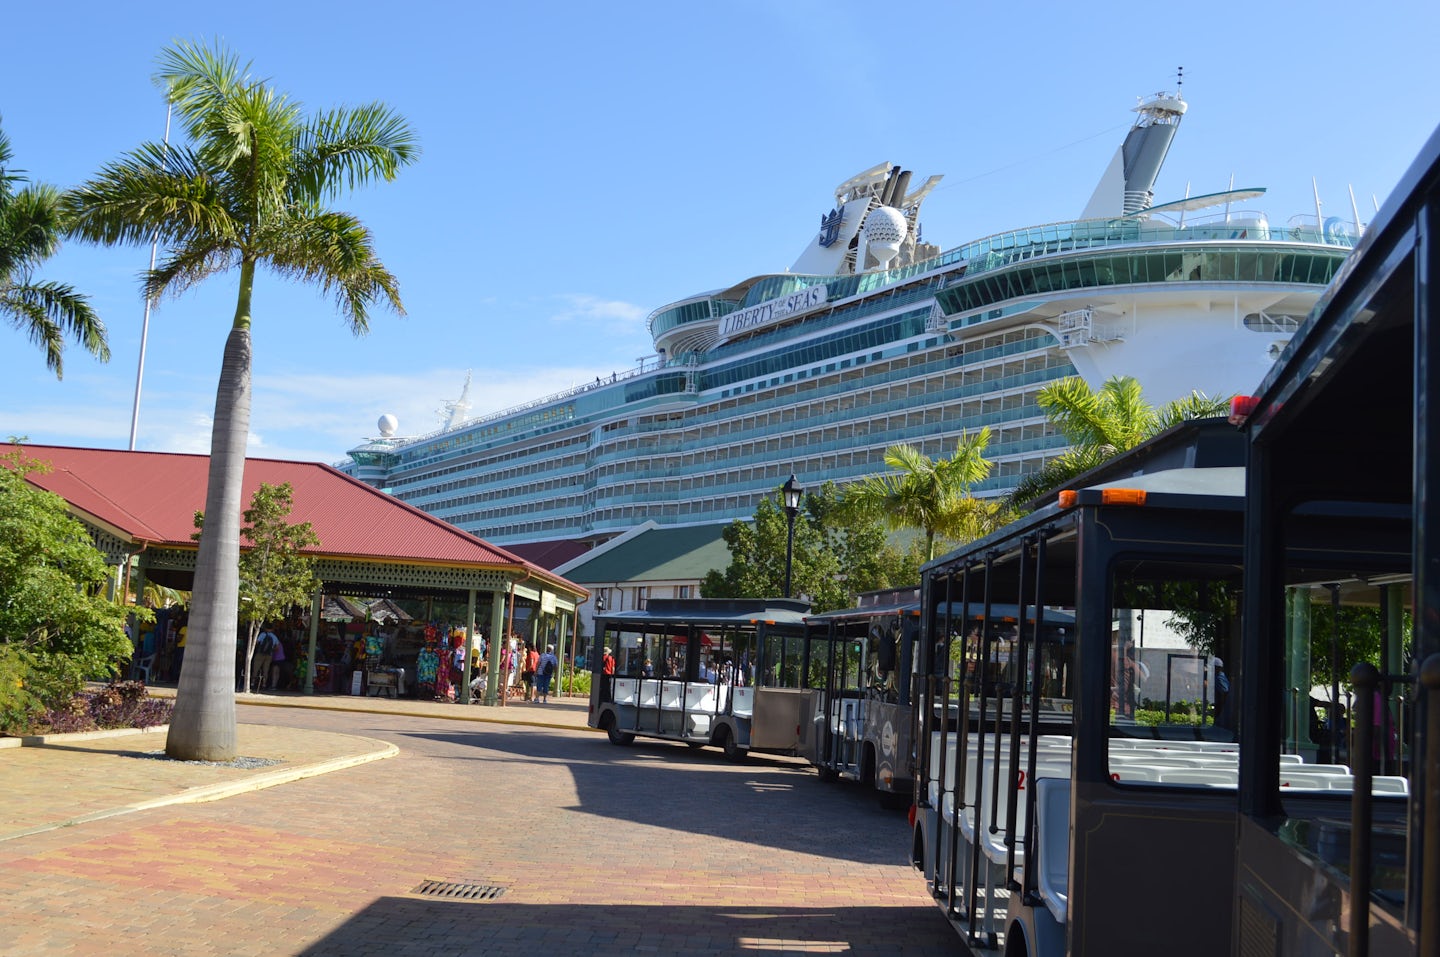 Waiting for a shore excursion to start so I took this picture of the Liberty of the Seas while in port at Falmouth Jamaica